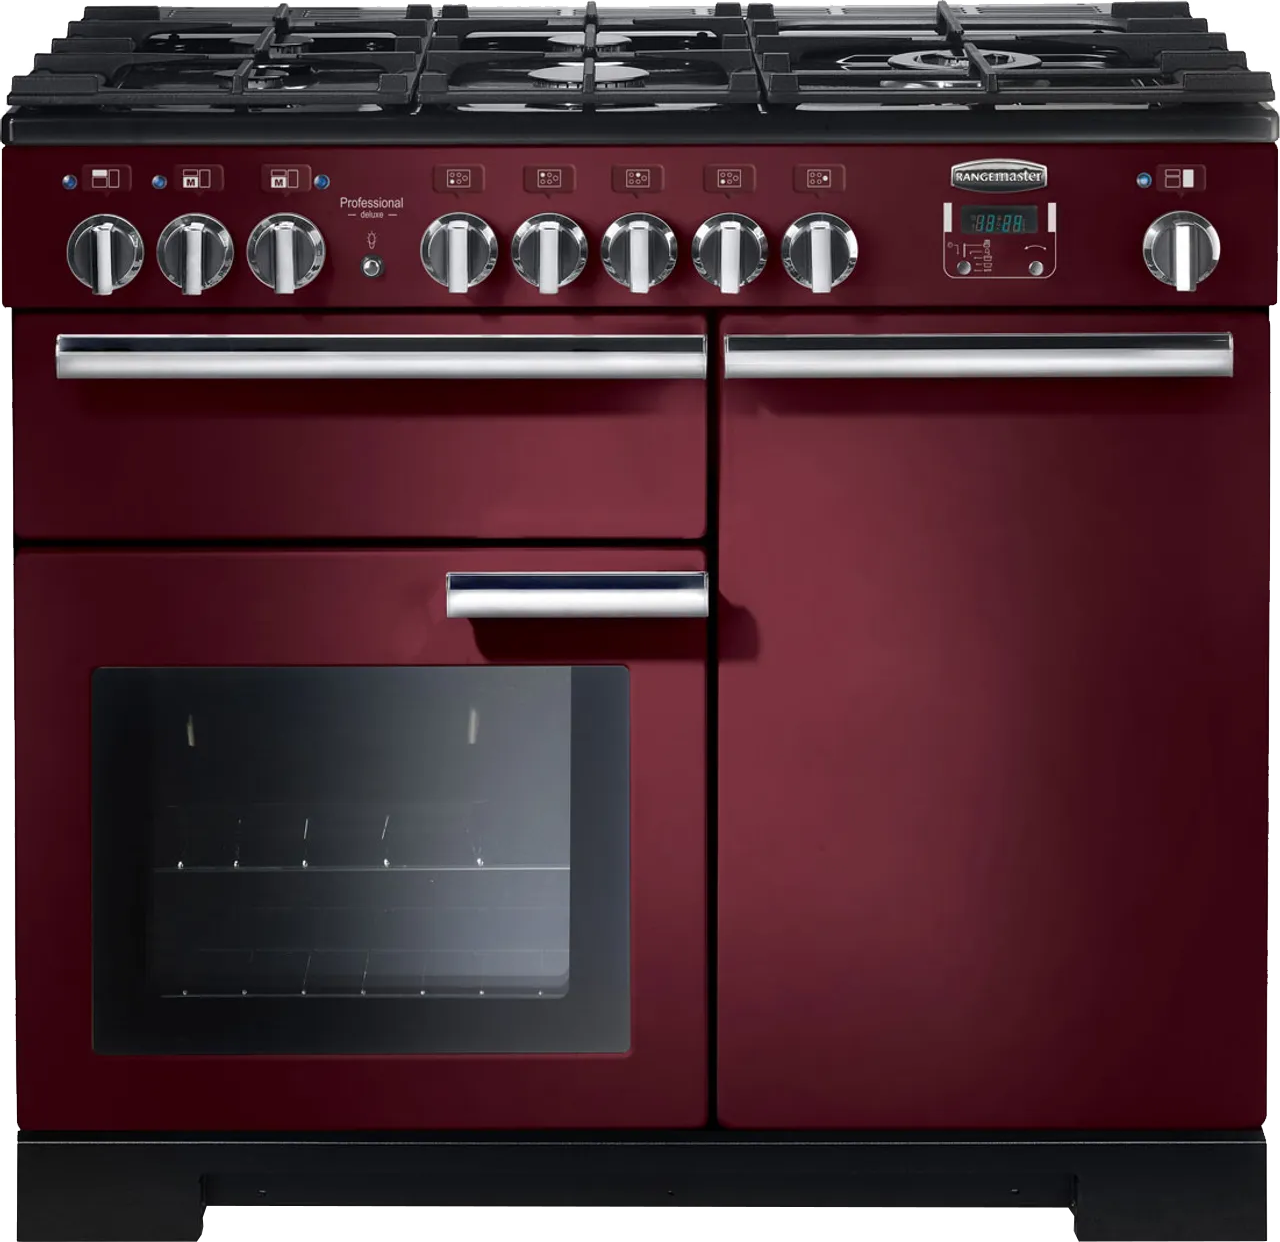 Rangemaster Professional Deluxe PDL100DFFCY/C 100cm Dual Fuel Range Cooker - Cranberry - A/A Rated, Red